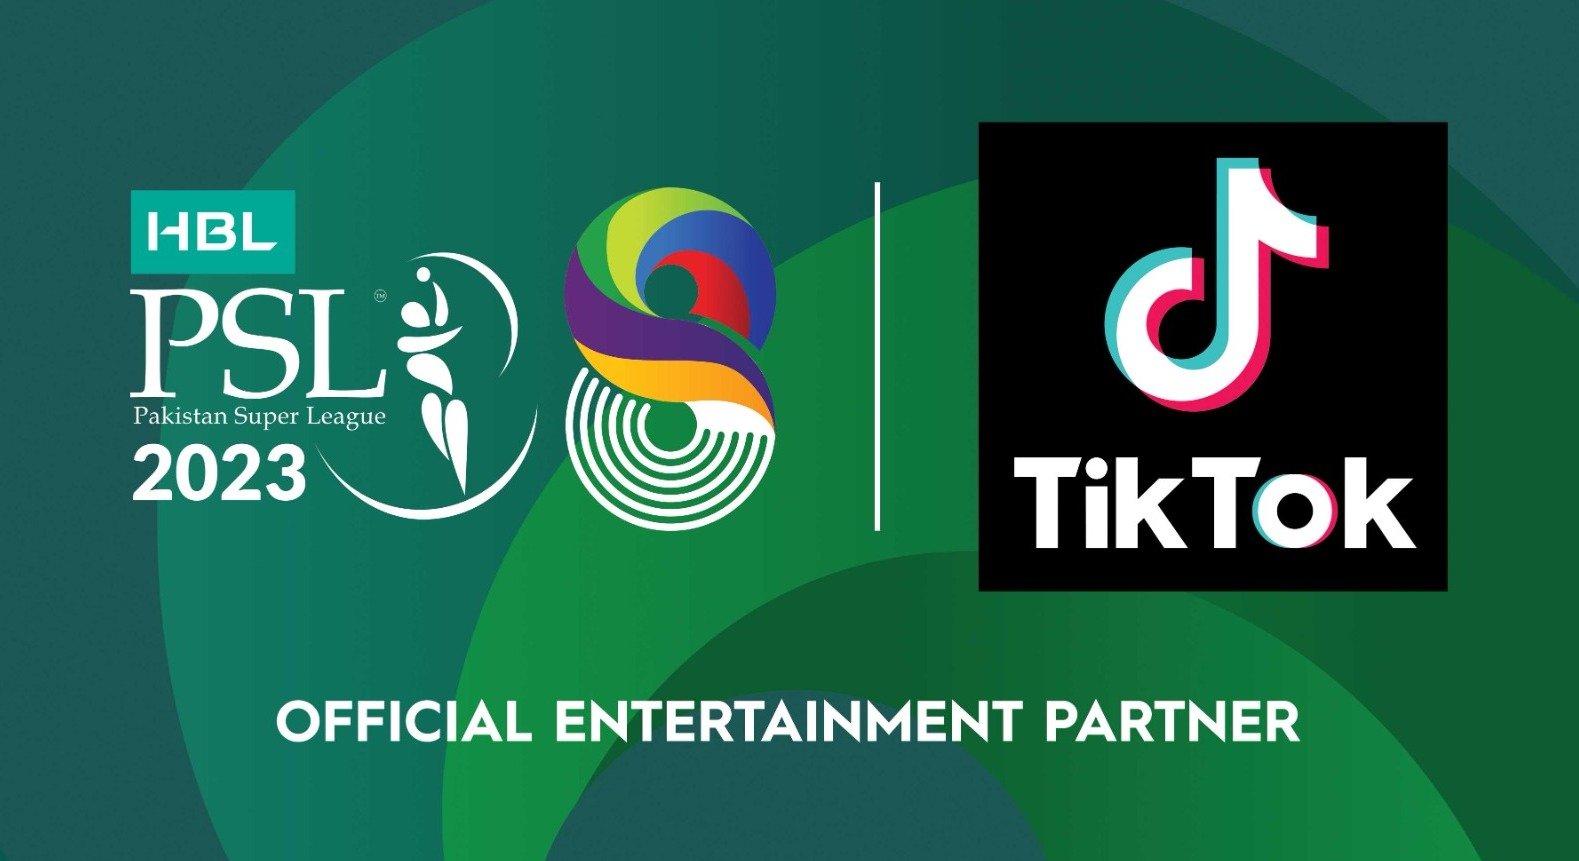 With over 2.5 billion views last year, TikTok returns as Official Entertainment Partner for HBL PSL 8 Press Release PCB